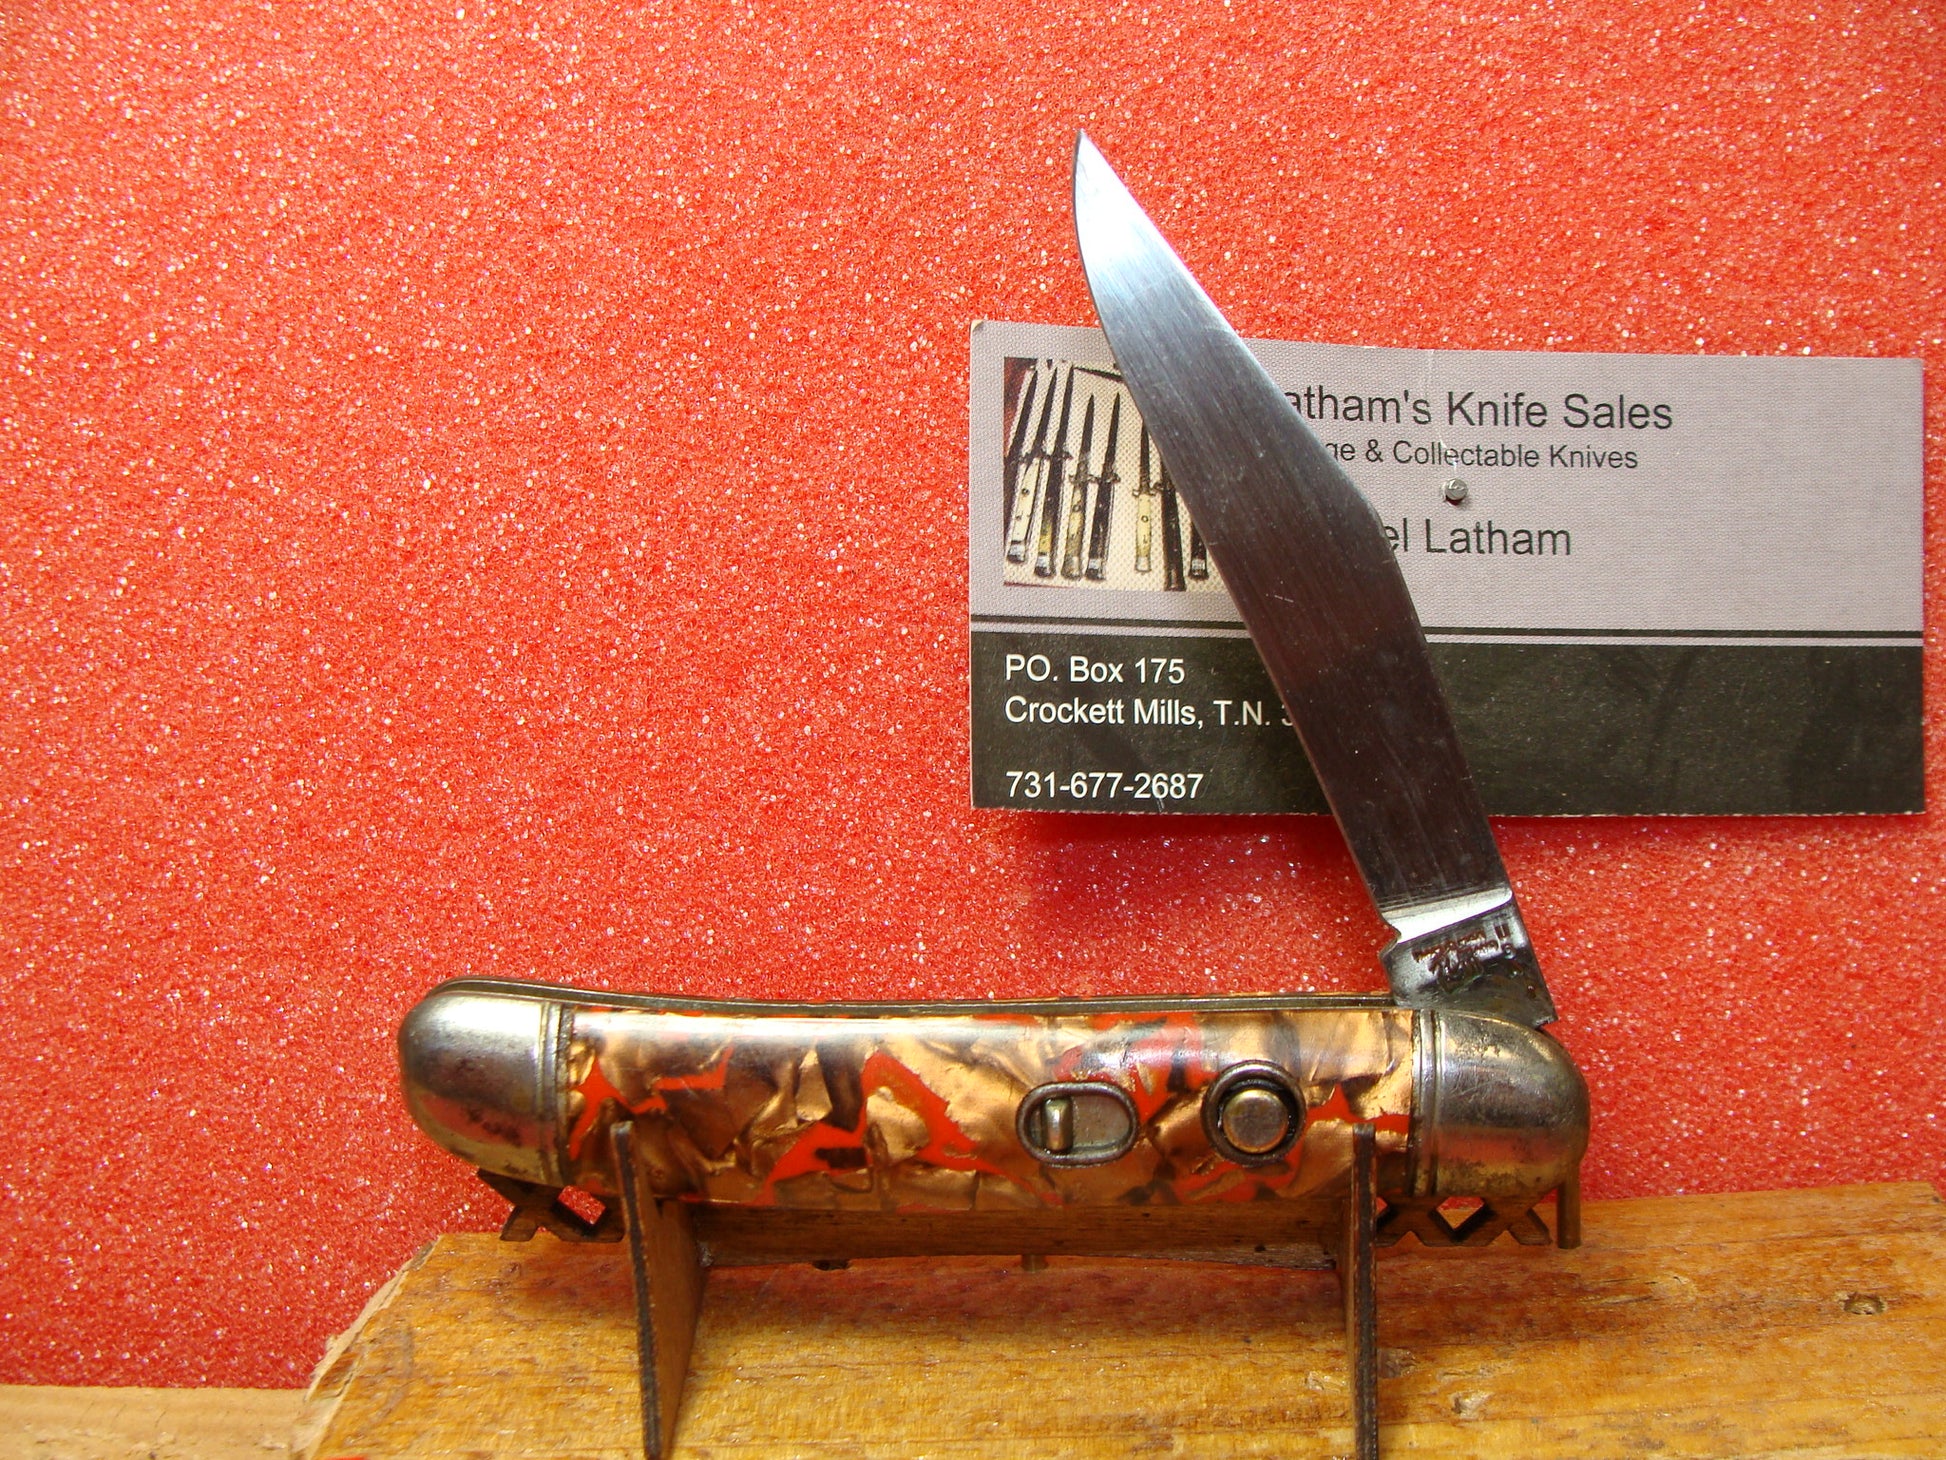 HAMMER BRAND IMPERIAL CUT. 1945-55 VINTAGE AMERICAN AUTOMATIC KNIFE 3 –  Latham's Vintage Sales